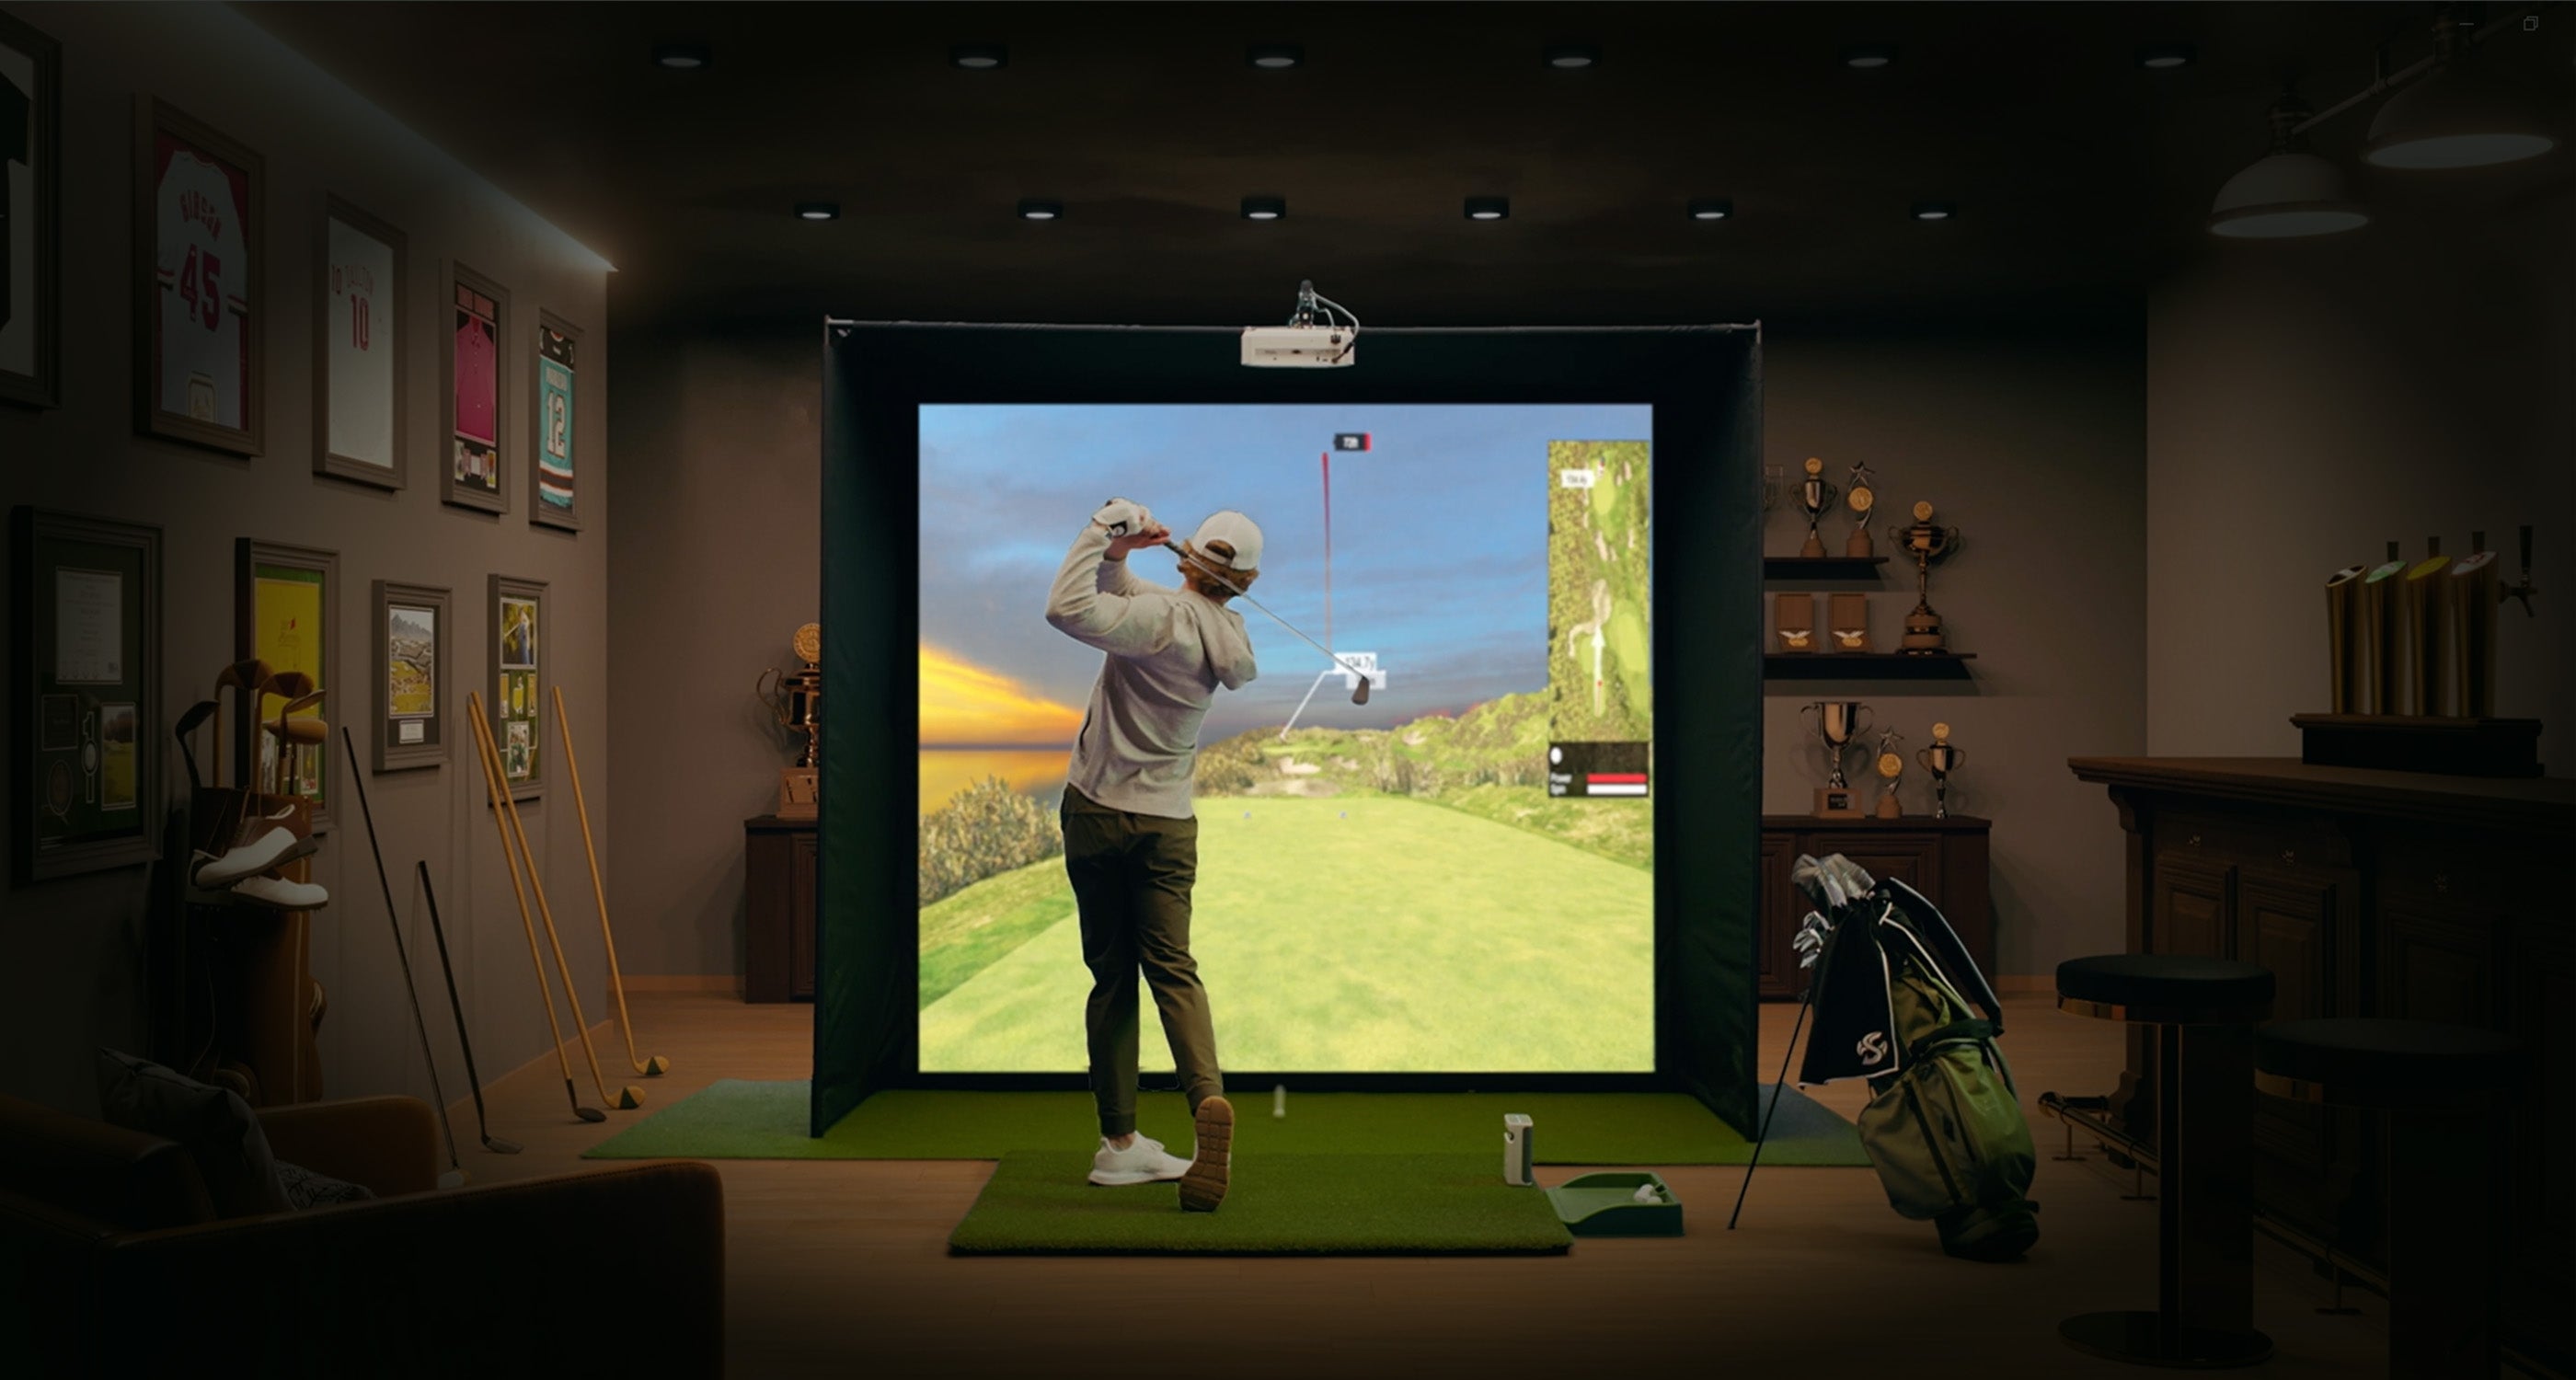 Guy playing indoor golf simulator in man cave with SKYTRAK plus launch monitor